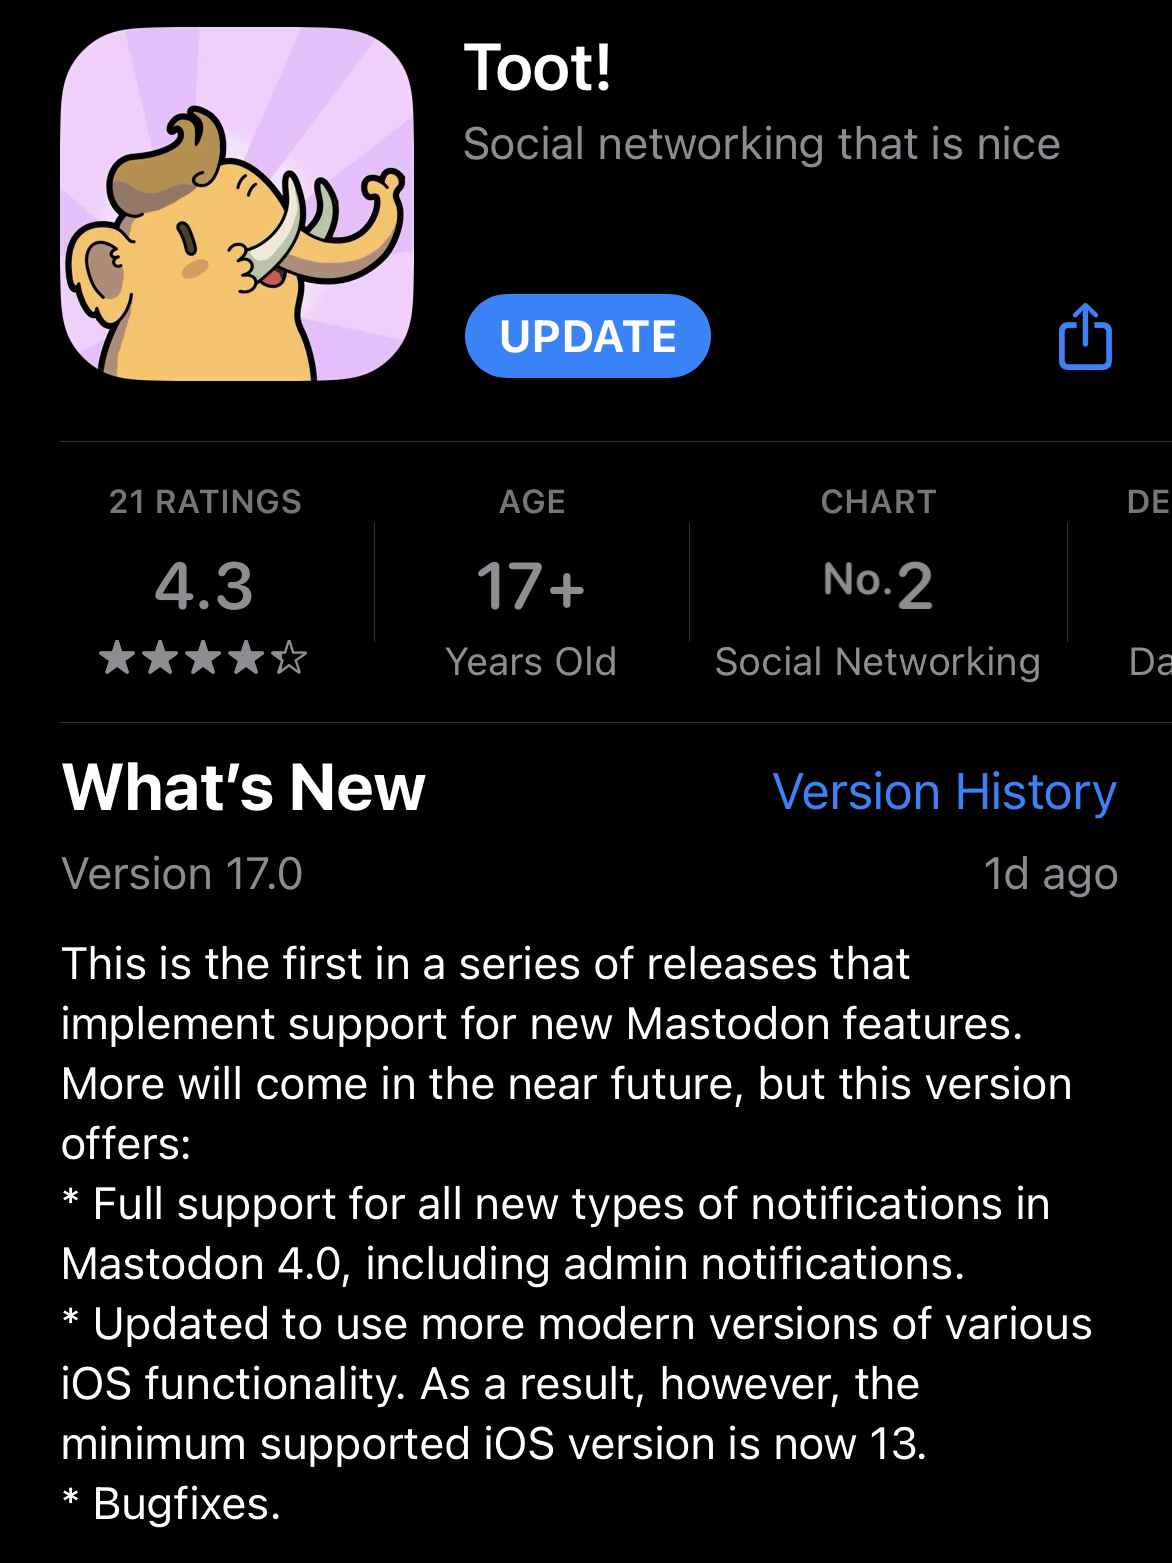 A screenshot of the Toot! app from the Apple app  store and the update notes for version 17.